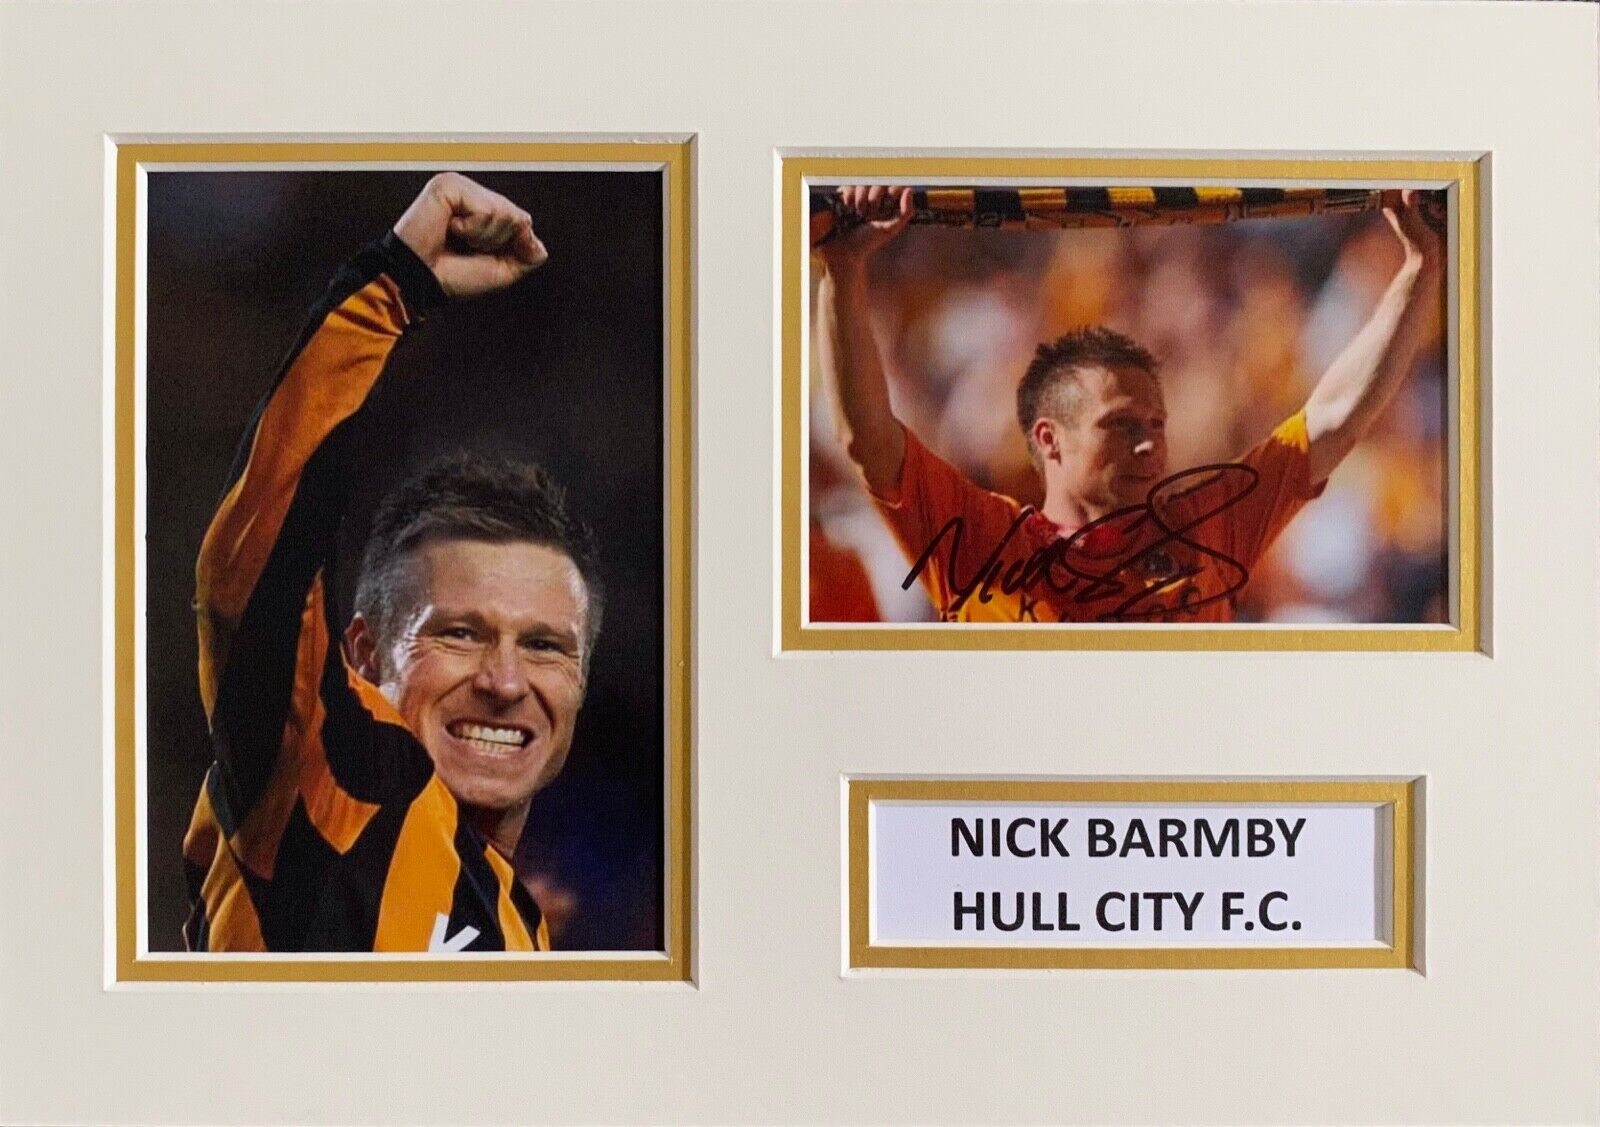 NICK BARMBY HAND SIGNED A4 Photo Poster painting MOUNT DISPLAY HULL CITY AUTOGRAPH 1